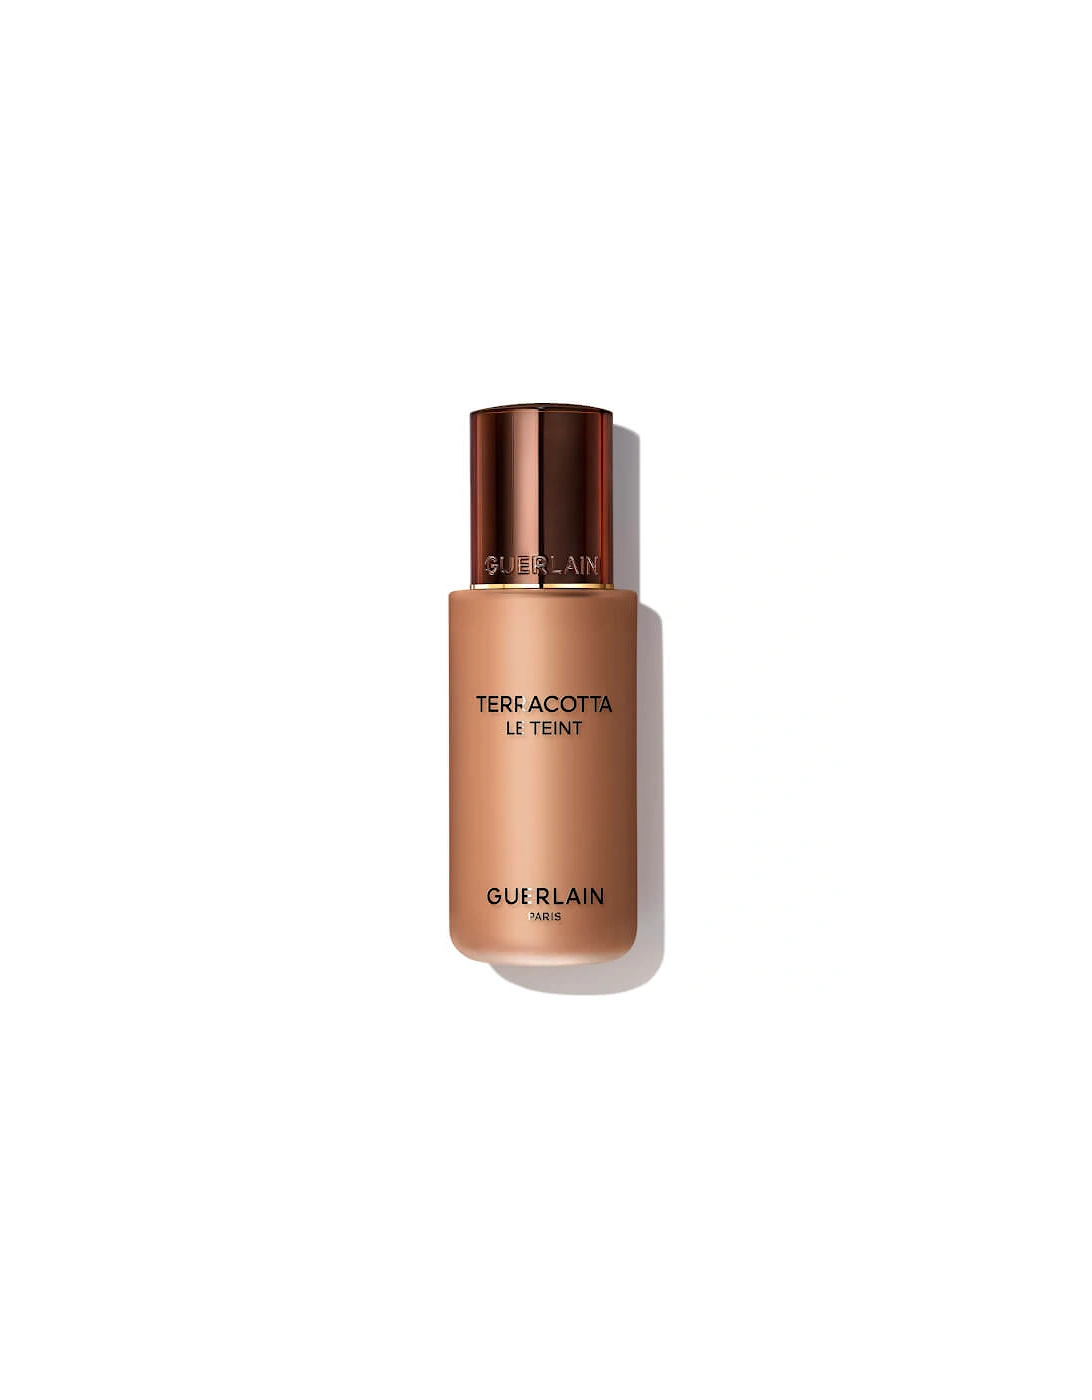 Terracotta Le Teint Healthy Glow Natural Perfection Foundation - 6N, 2 of 1